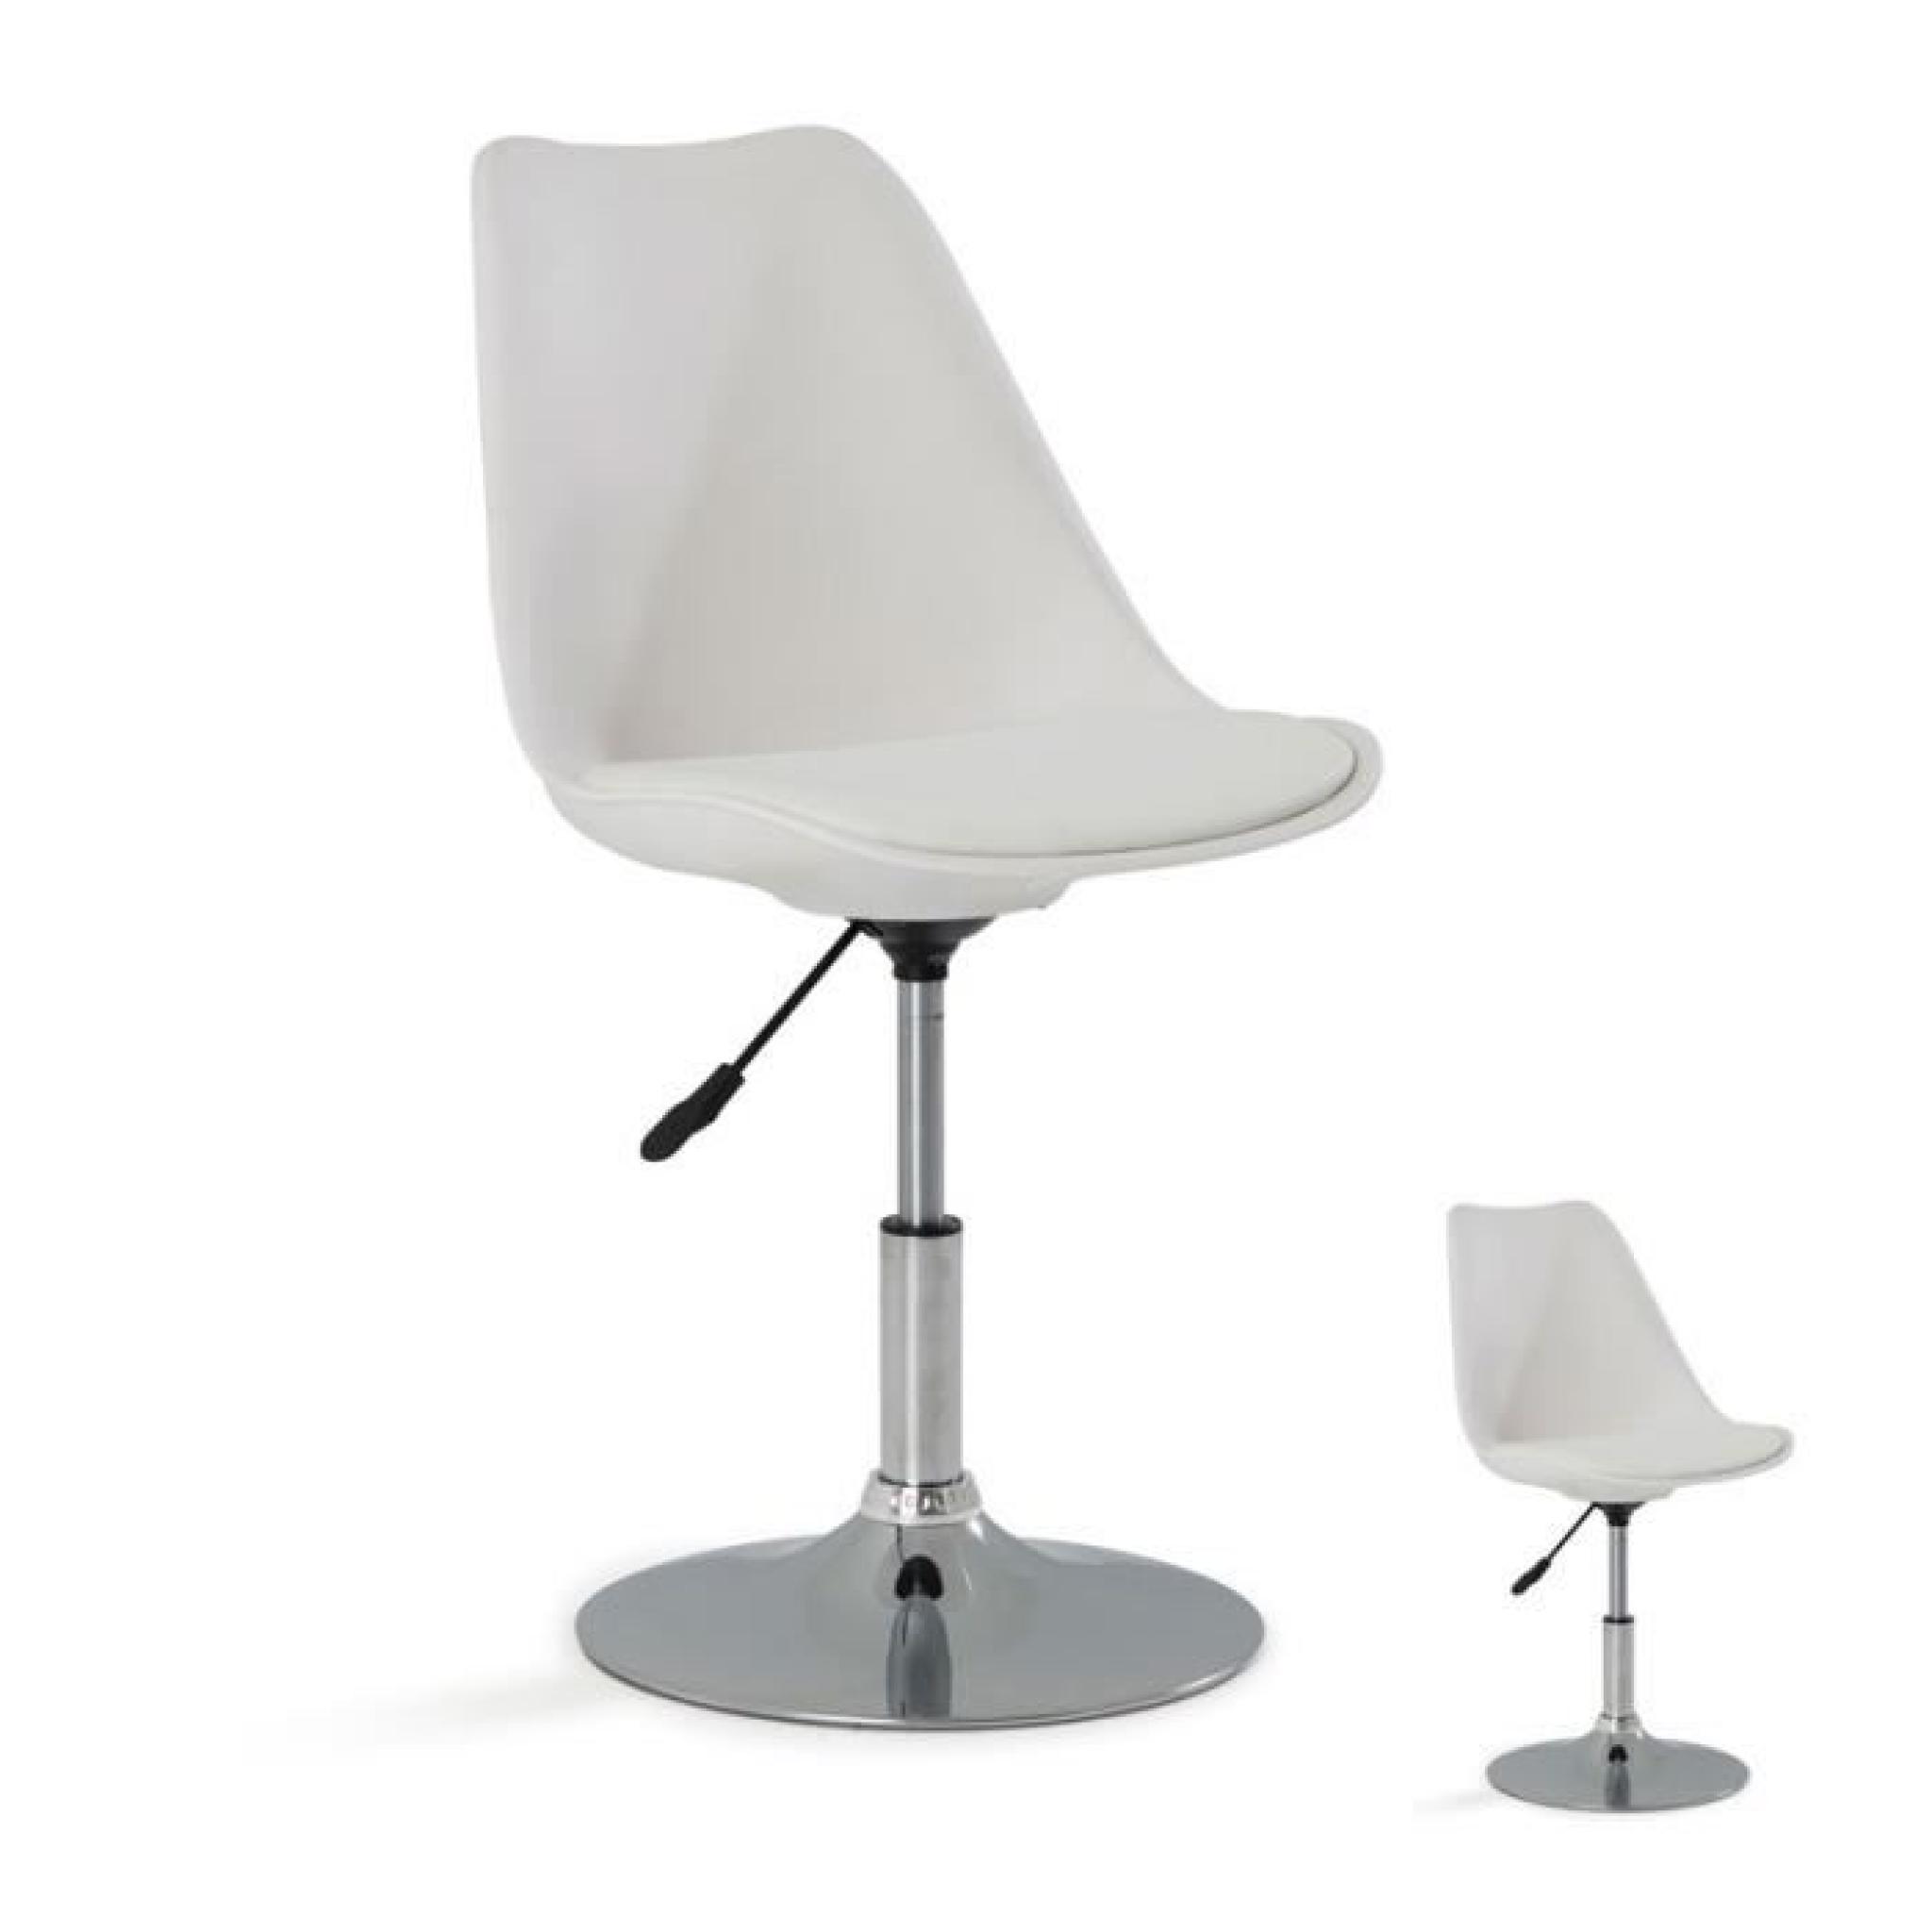 Duo de chaises Blanches - TULP